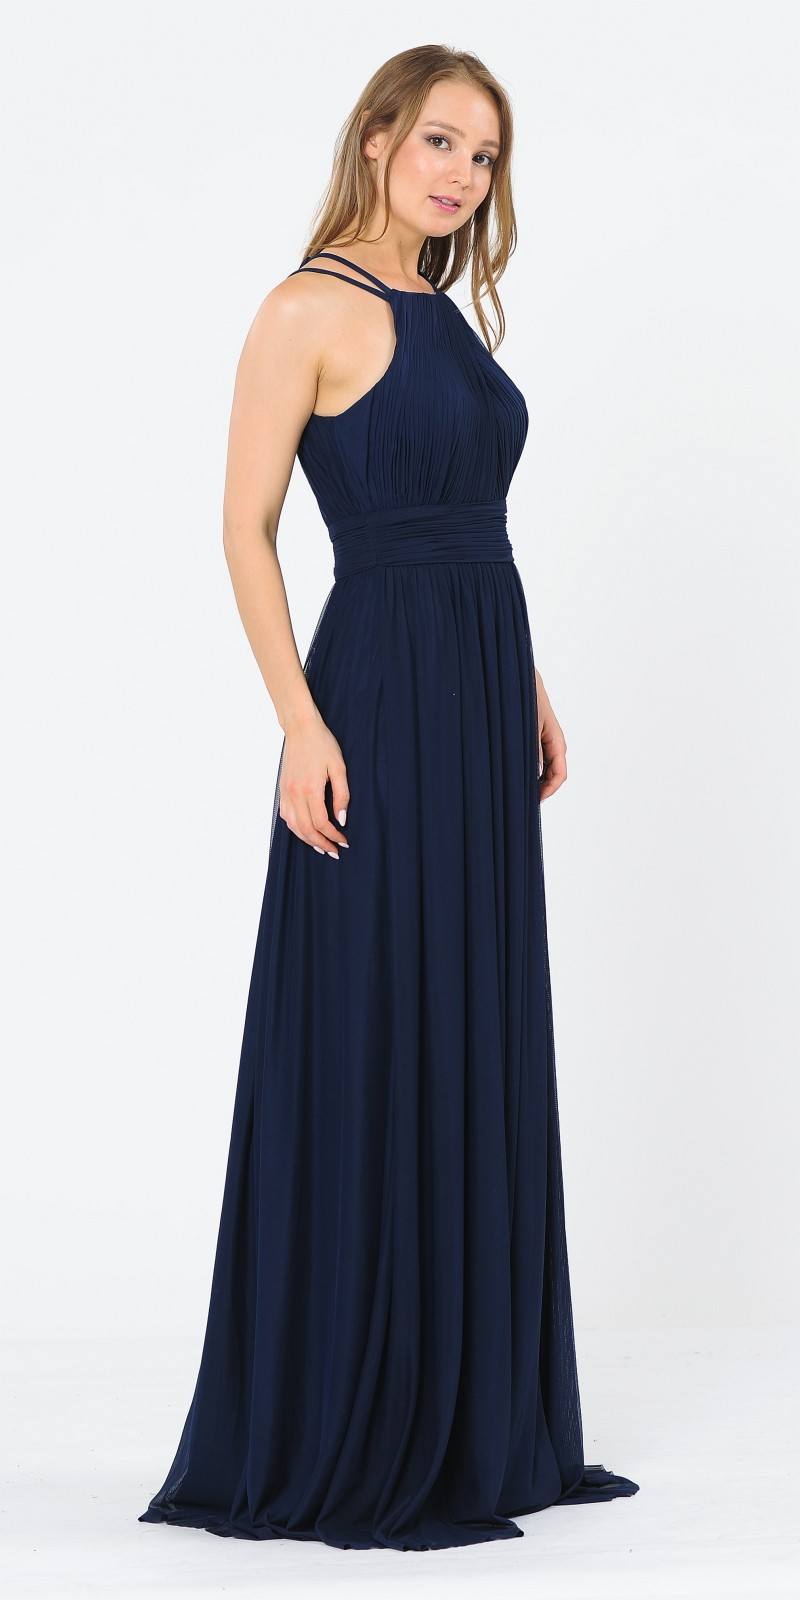 Poly USA 8396 Halter Ruched Bodice Long Formal Dress Navy Blue